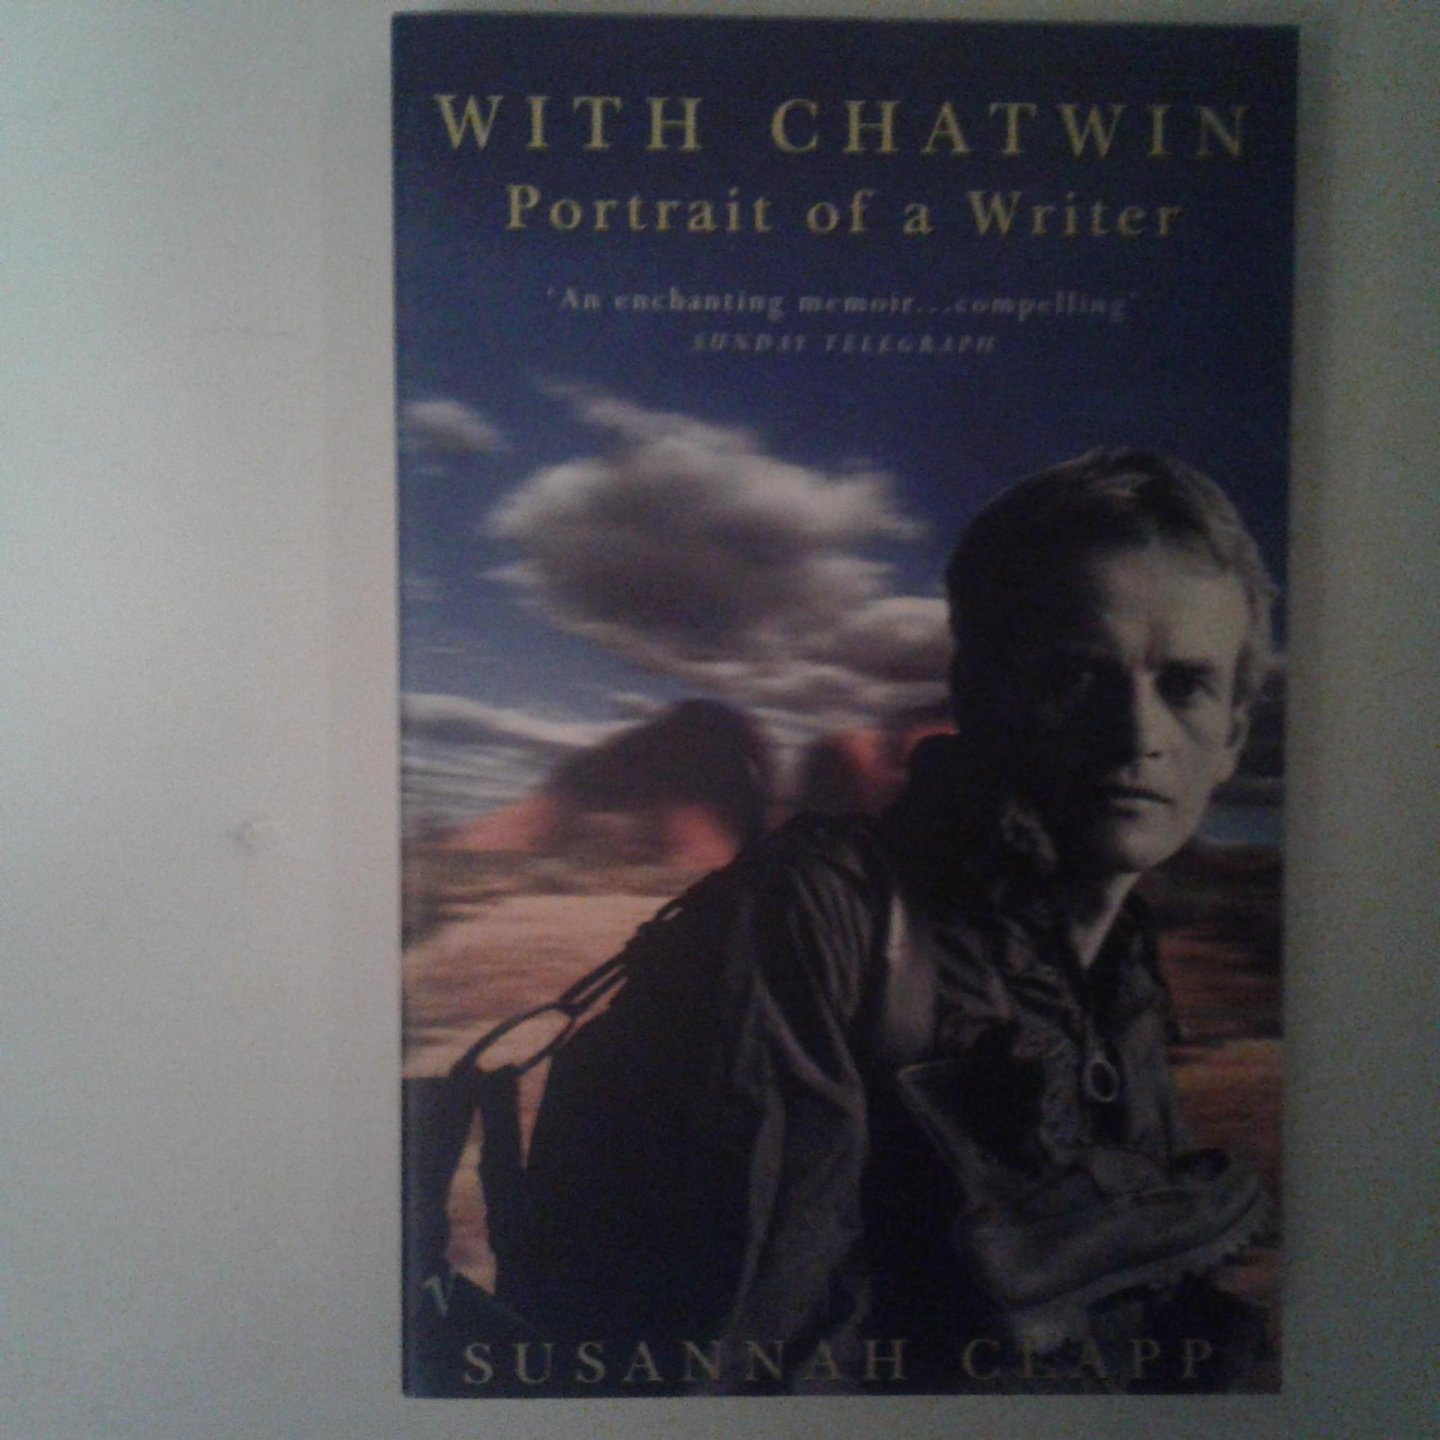 Clapp, Susannah - Portrait of a Writer ; With Chatwin